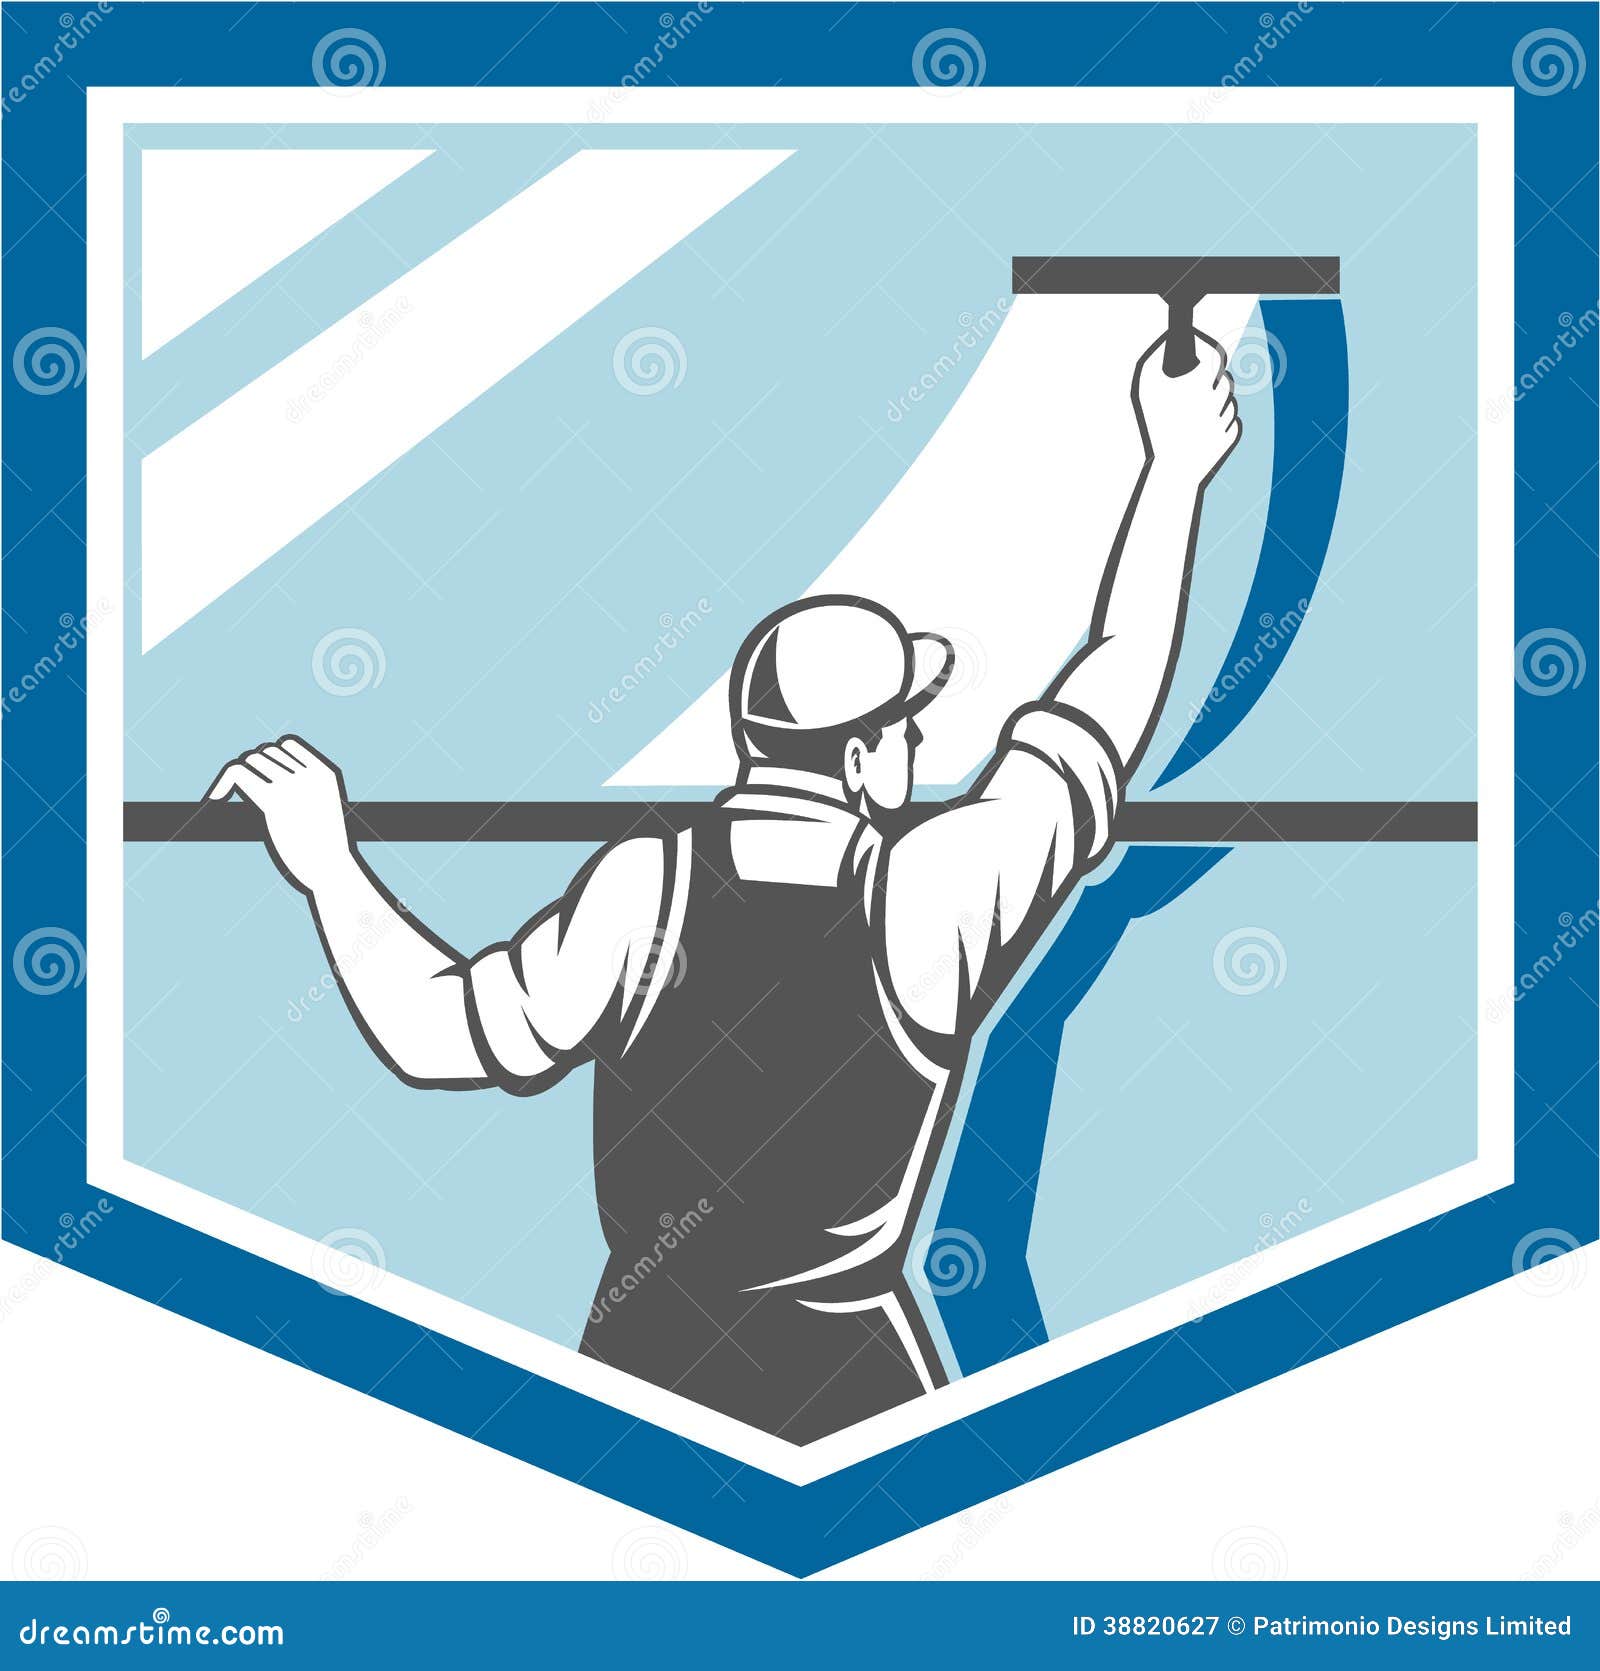 free clipart window cleaner - photo #19